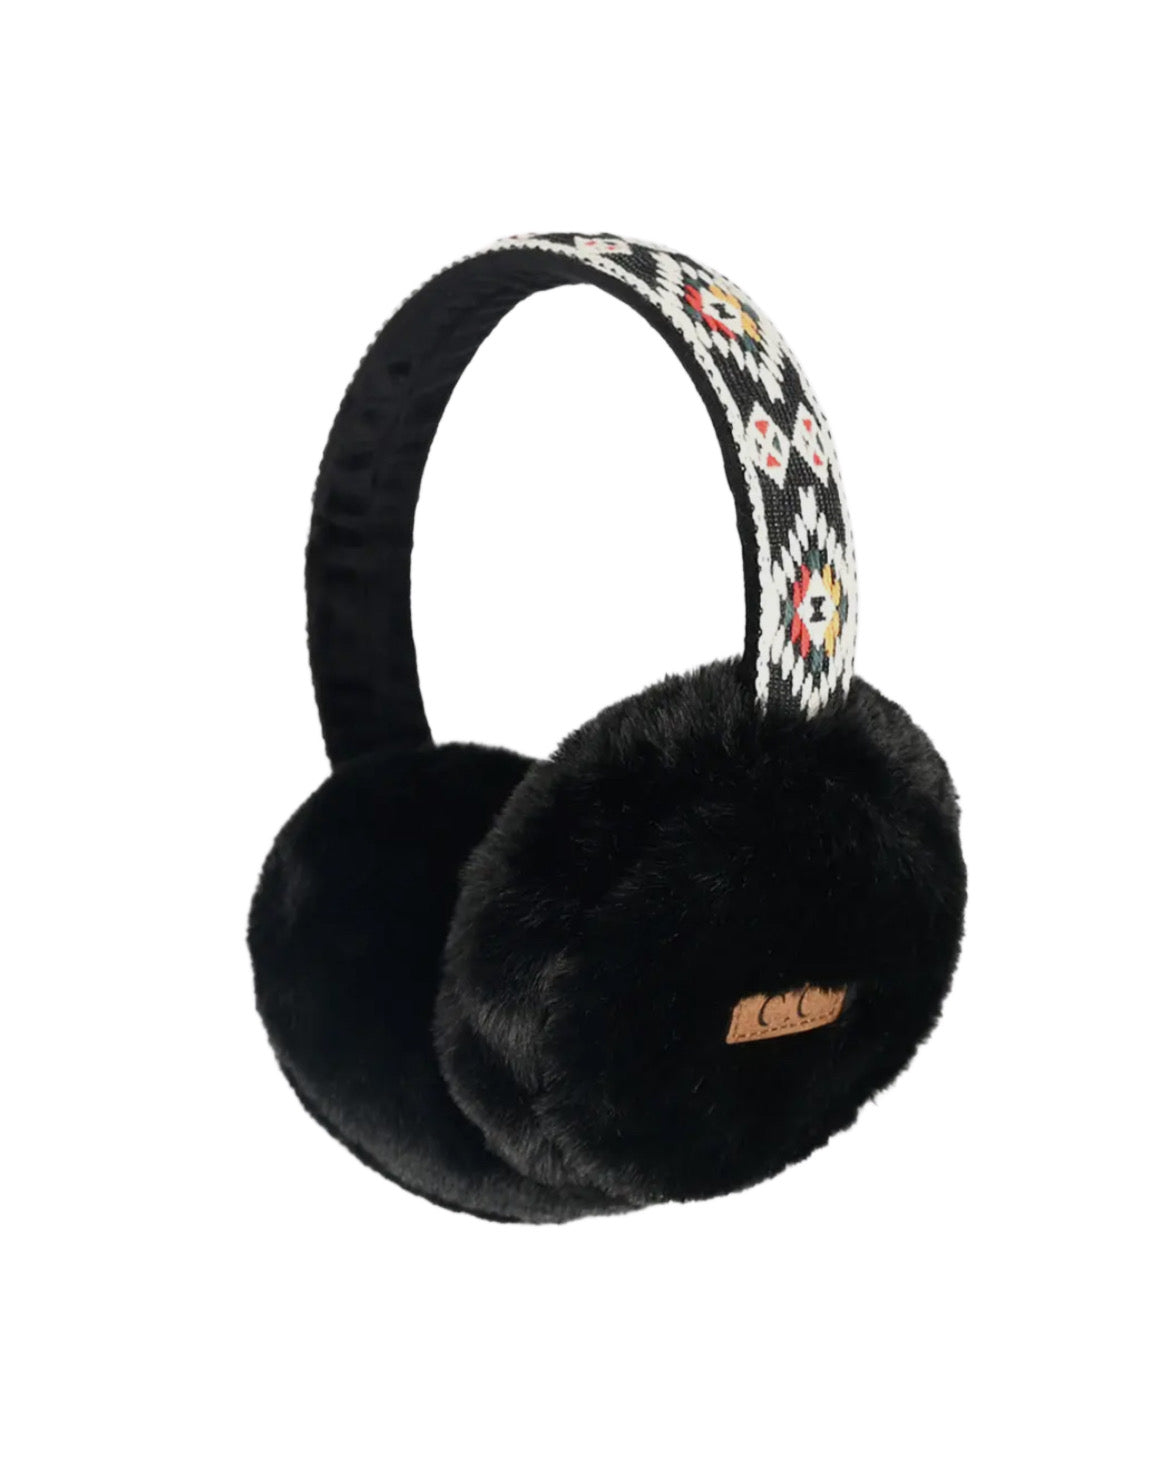 Aztec Ear Muffs - Imperfectly Perfect Boutique